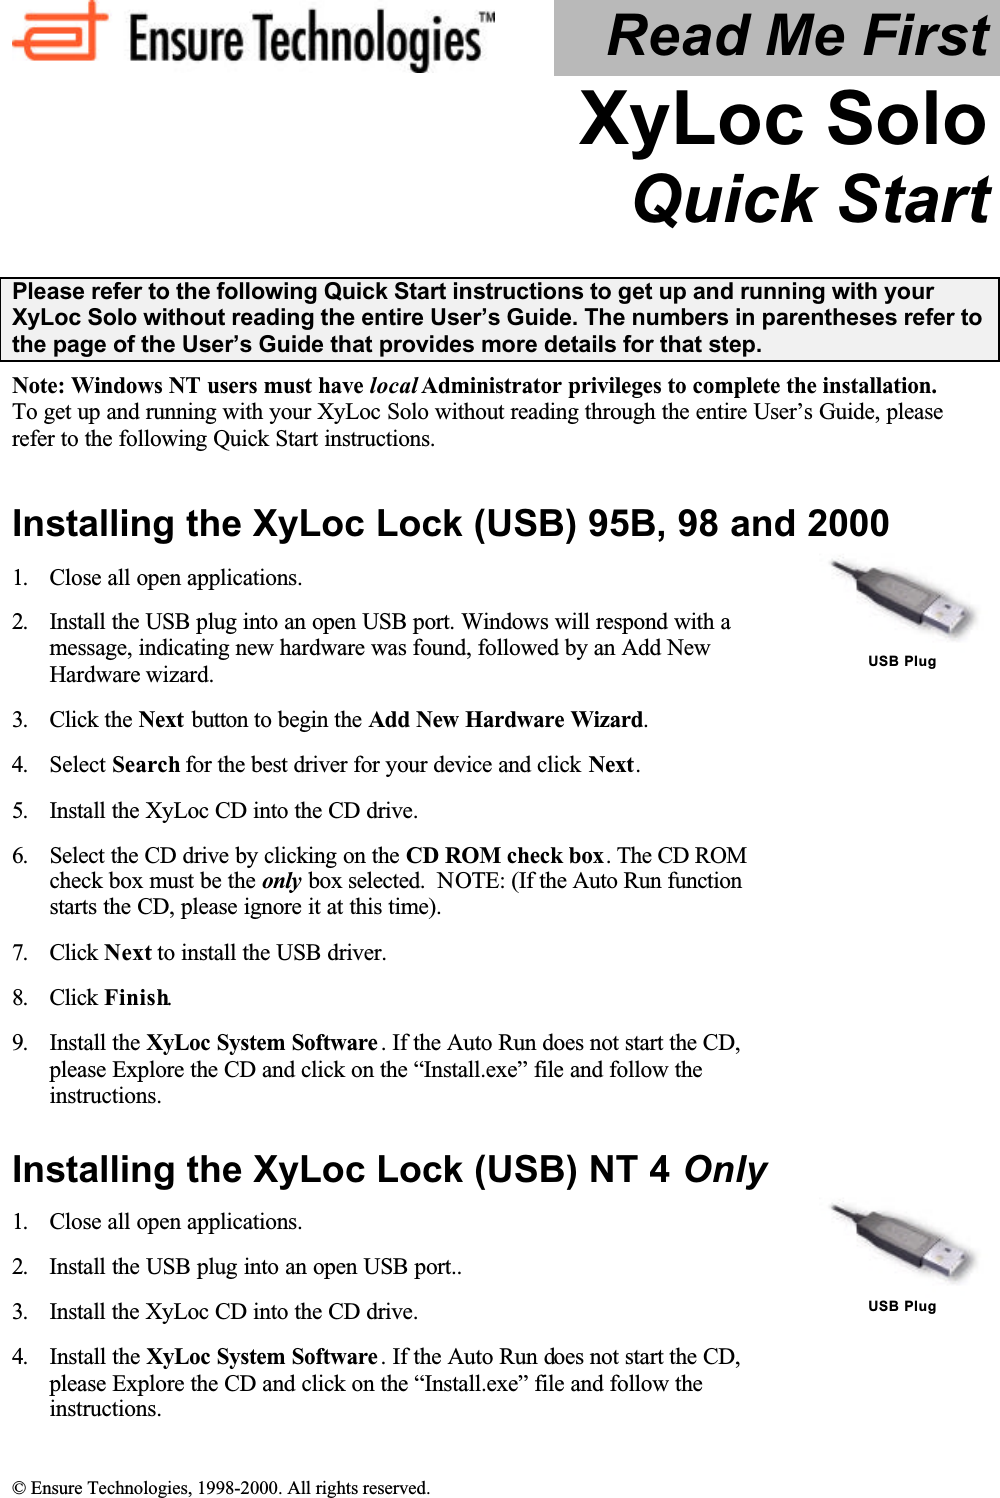  © Ensure Technologies, 1998-2000. All rights reserved. Read Me First XyLoc Solo Quick Start  Please refer to the following Quick Start instructions to get up and running with your XyLoc Solo without reading the entire User’s Guide. The numbers in parentheses refer to the page of the User’s Guide that provides more details for that step. Note: Windows NT users must have local Administrator privileges to complete the installation. To get up and running with your XyLoc Solo without reading through the entire User’s Guide, please refer to the following Quick Start instructions. Installing the XyLoc Lock (USB) 95B, 98 and 2000 1.  Close all open applications. 2.  Install the USB plug into an open USB port. Windows will respond with a message, indicating new hardware was found, followed by an Add New Hardware wizard.  3.  Click the Next button to begin the Add New Hardware Wizard. 4.  Select Search for the best driver for your device and click Next. 5.  Install the XyLoc CD into the CD drive. 6.  Select the CD drive by clicking on the CD ROM check box. The CD ROM check box must be the only box selected.  NOTE: (If the Auto Run function starts the CD, please ignore it at this time). 7.  Click Next to install the USB driver. 8.  Click Finish. 9.  Install the XyLoc System Software . If the Auto Run does not start the CD, please Explore the CD and click on the “Install.exe” file and follow the instructions.   USB Plug Installing the XyLoc Lock (USB) NT 4 Only 1.  Close all open applications. 2.  Install the USB plug into an open USB port.. 3.  Install the XyLoc CD into the CD drive. 4.  Install the XyLoc System Software . If the Auto Run does not start the CD, please Explore the CD and click on the “Install.exe” file and follow the instructions.   USB Plug 